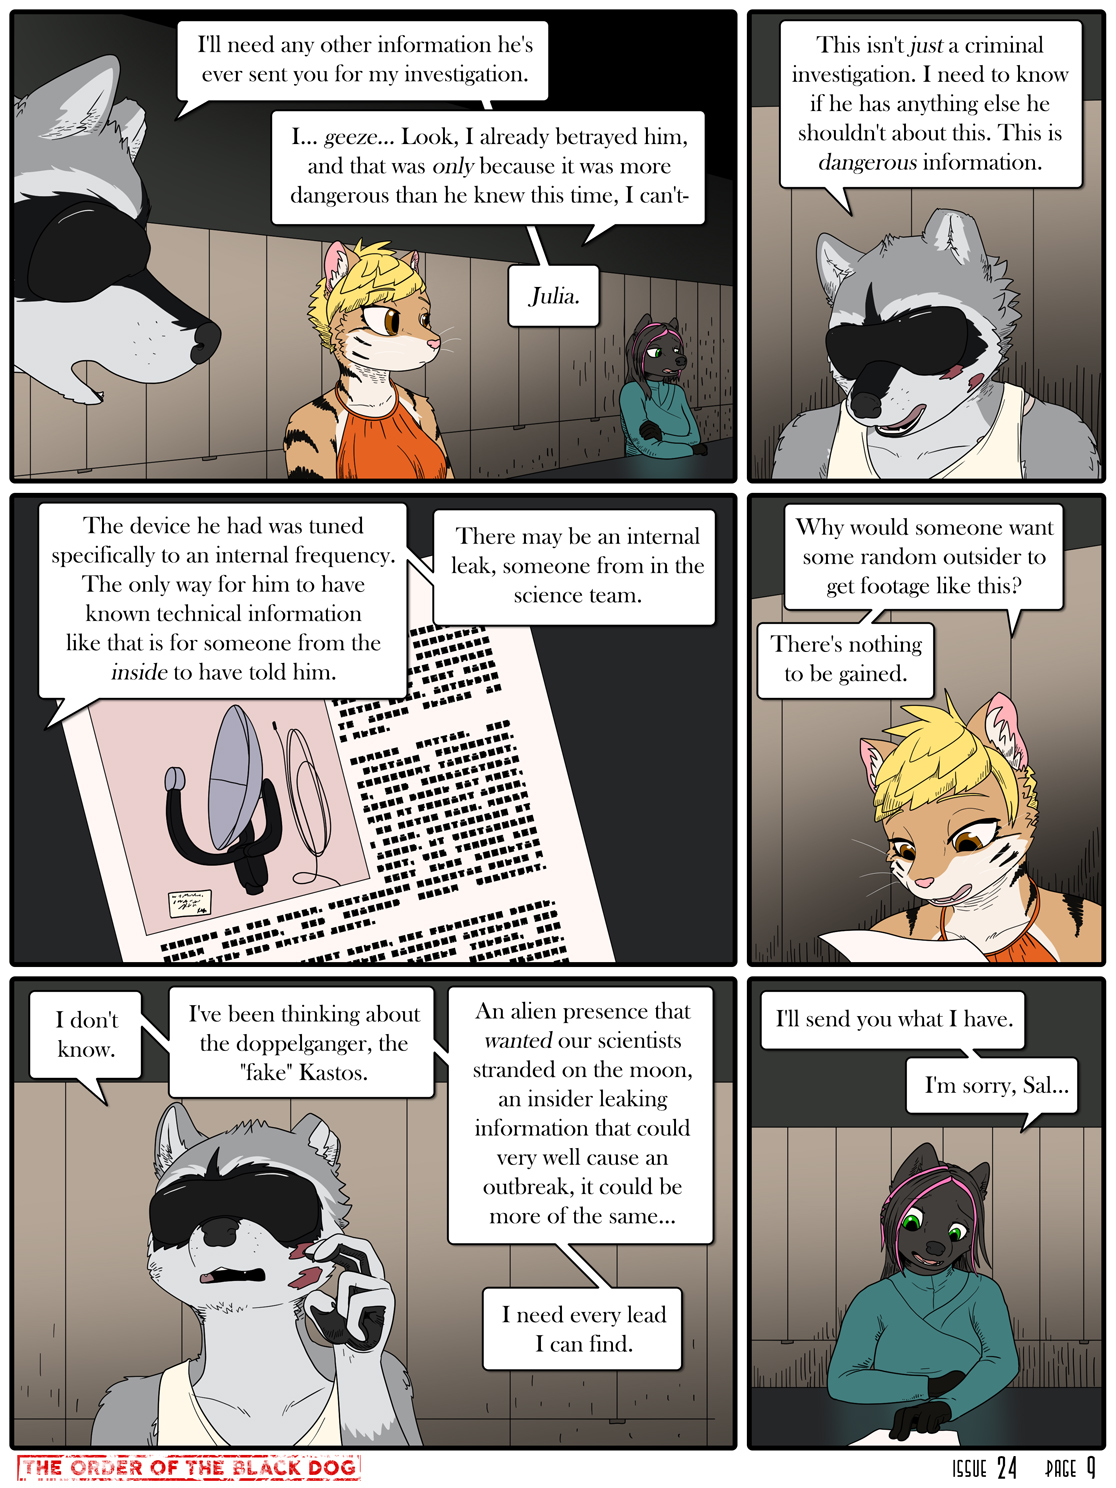 Issue 24, Page 9